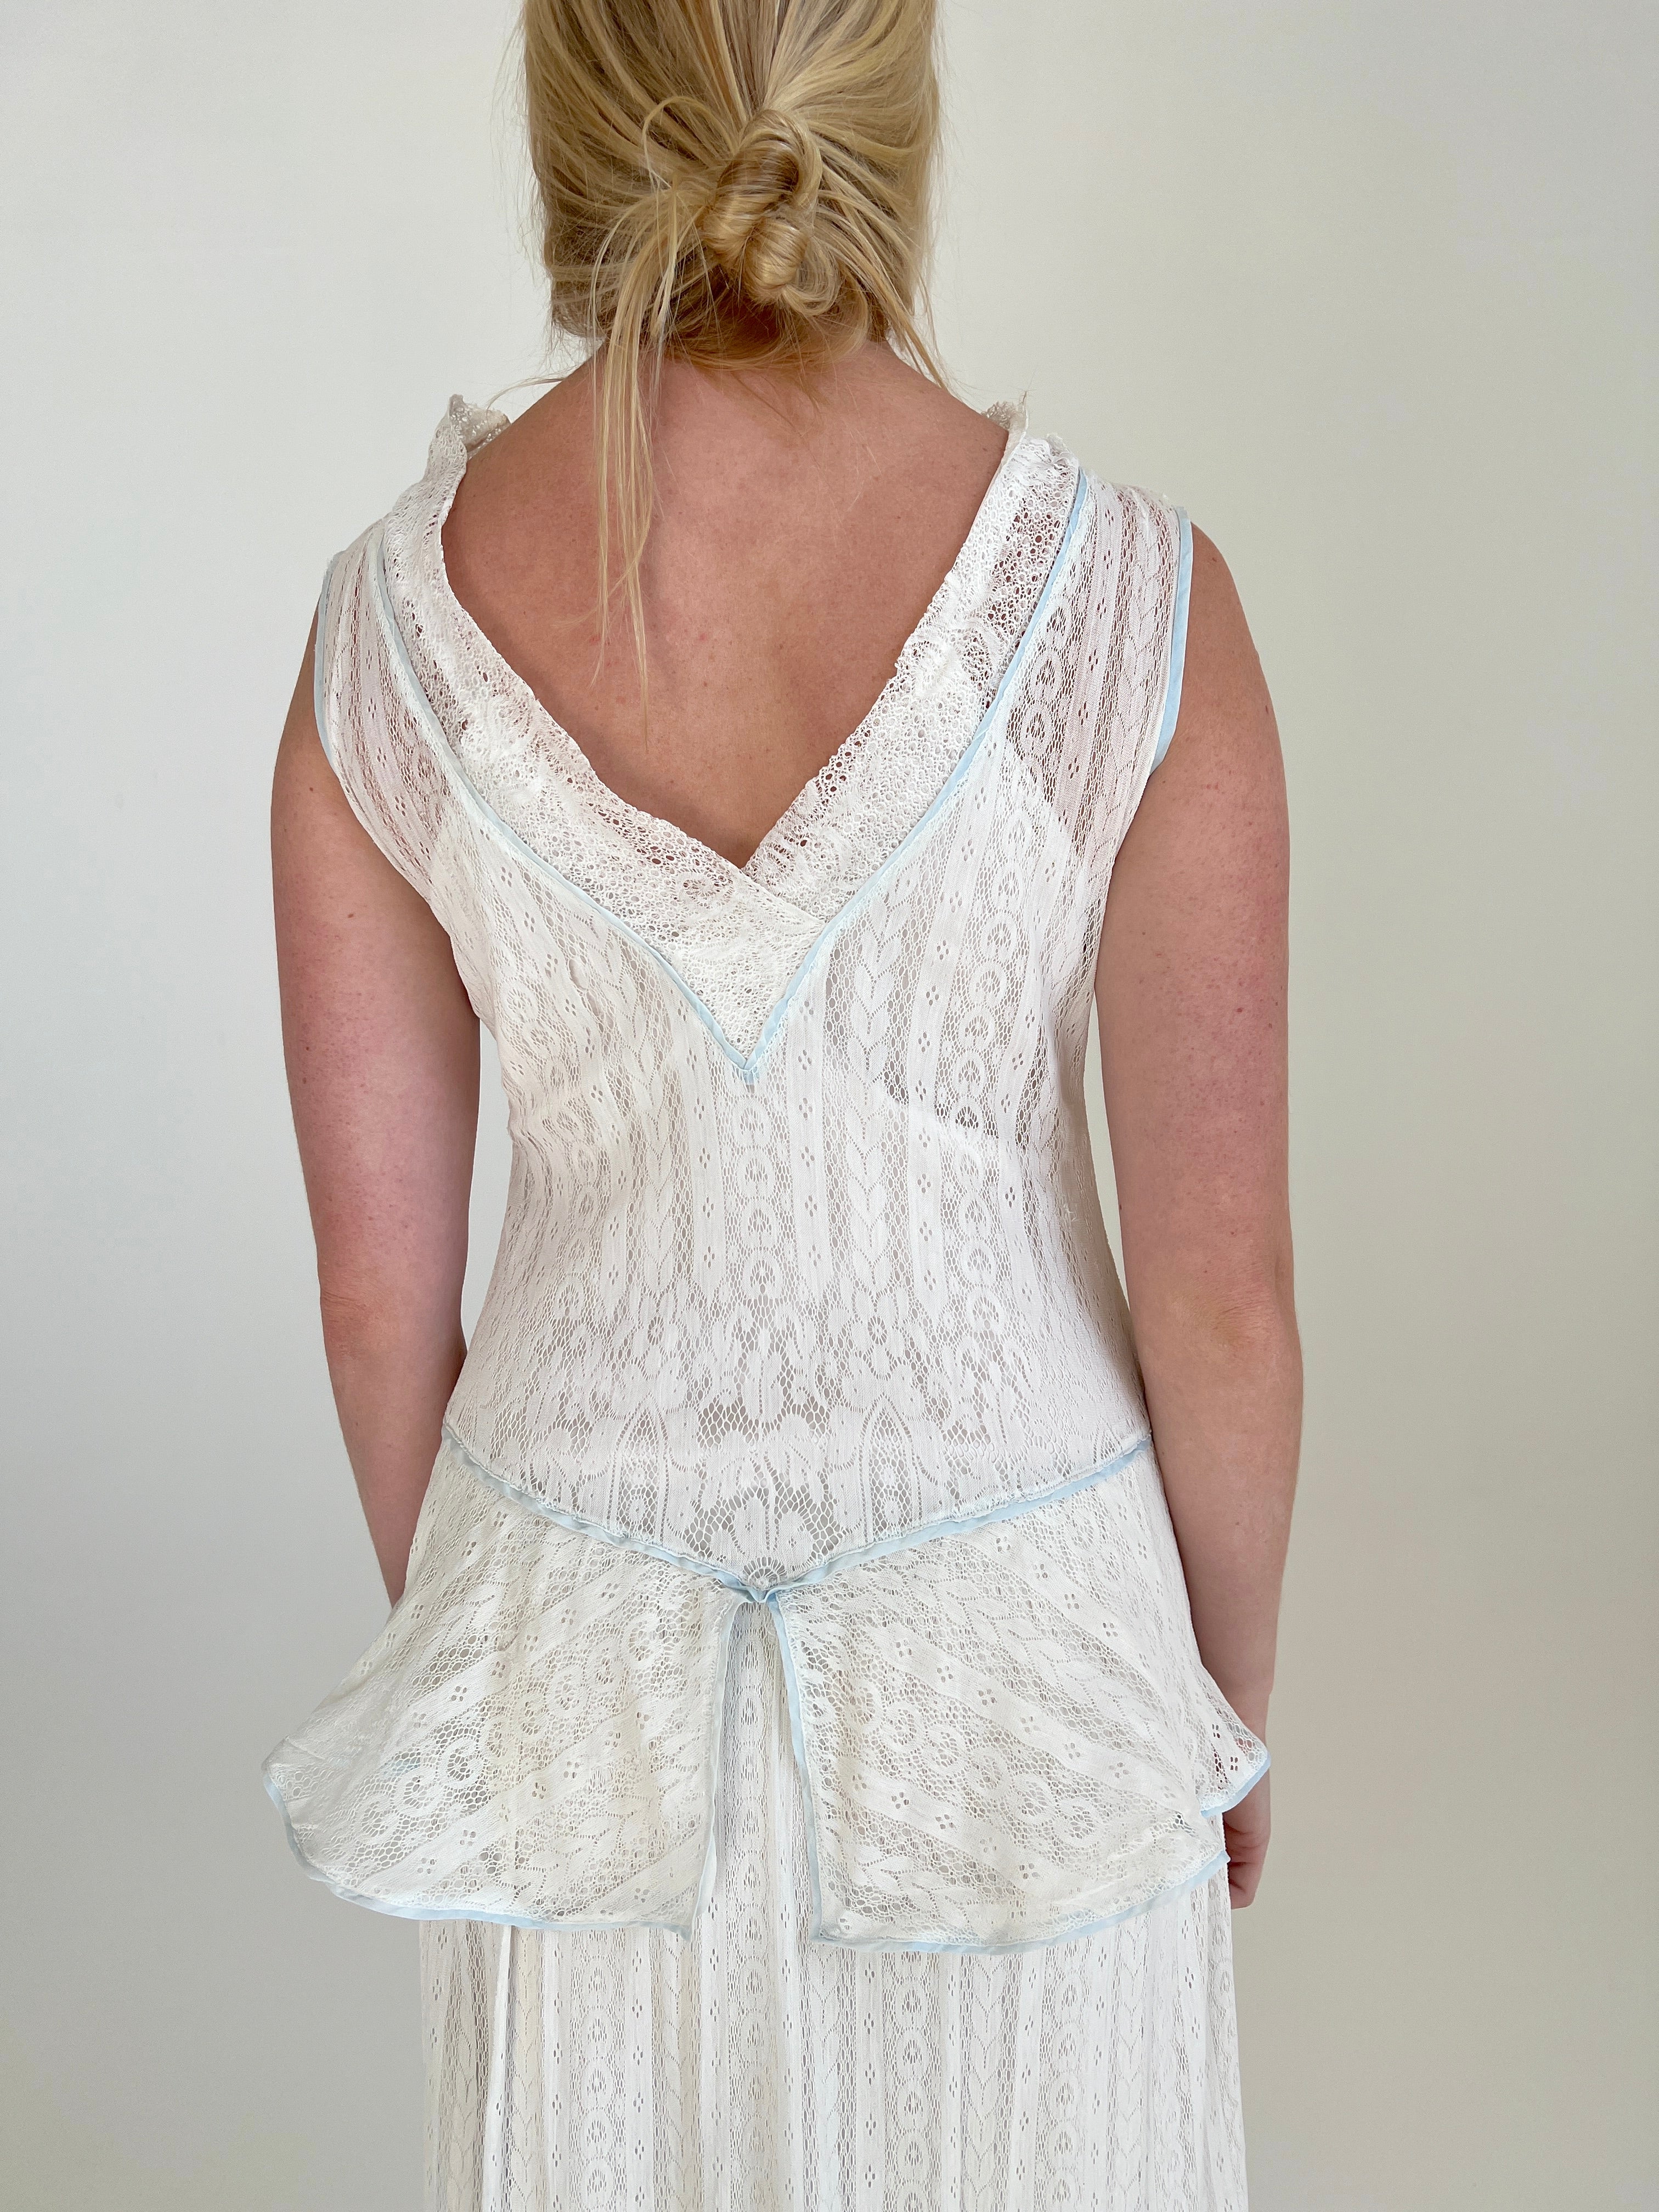 1930's White Lace Dress with Baby Blue Organza Trim